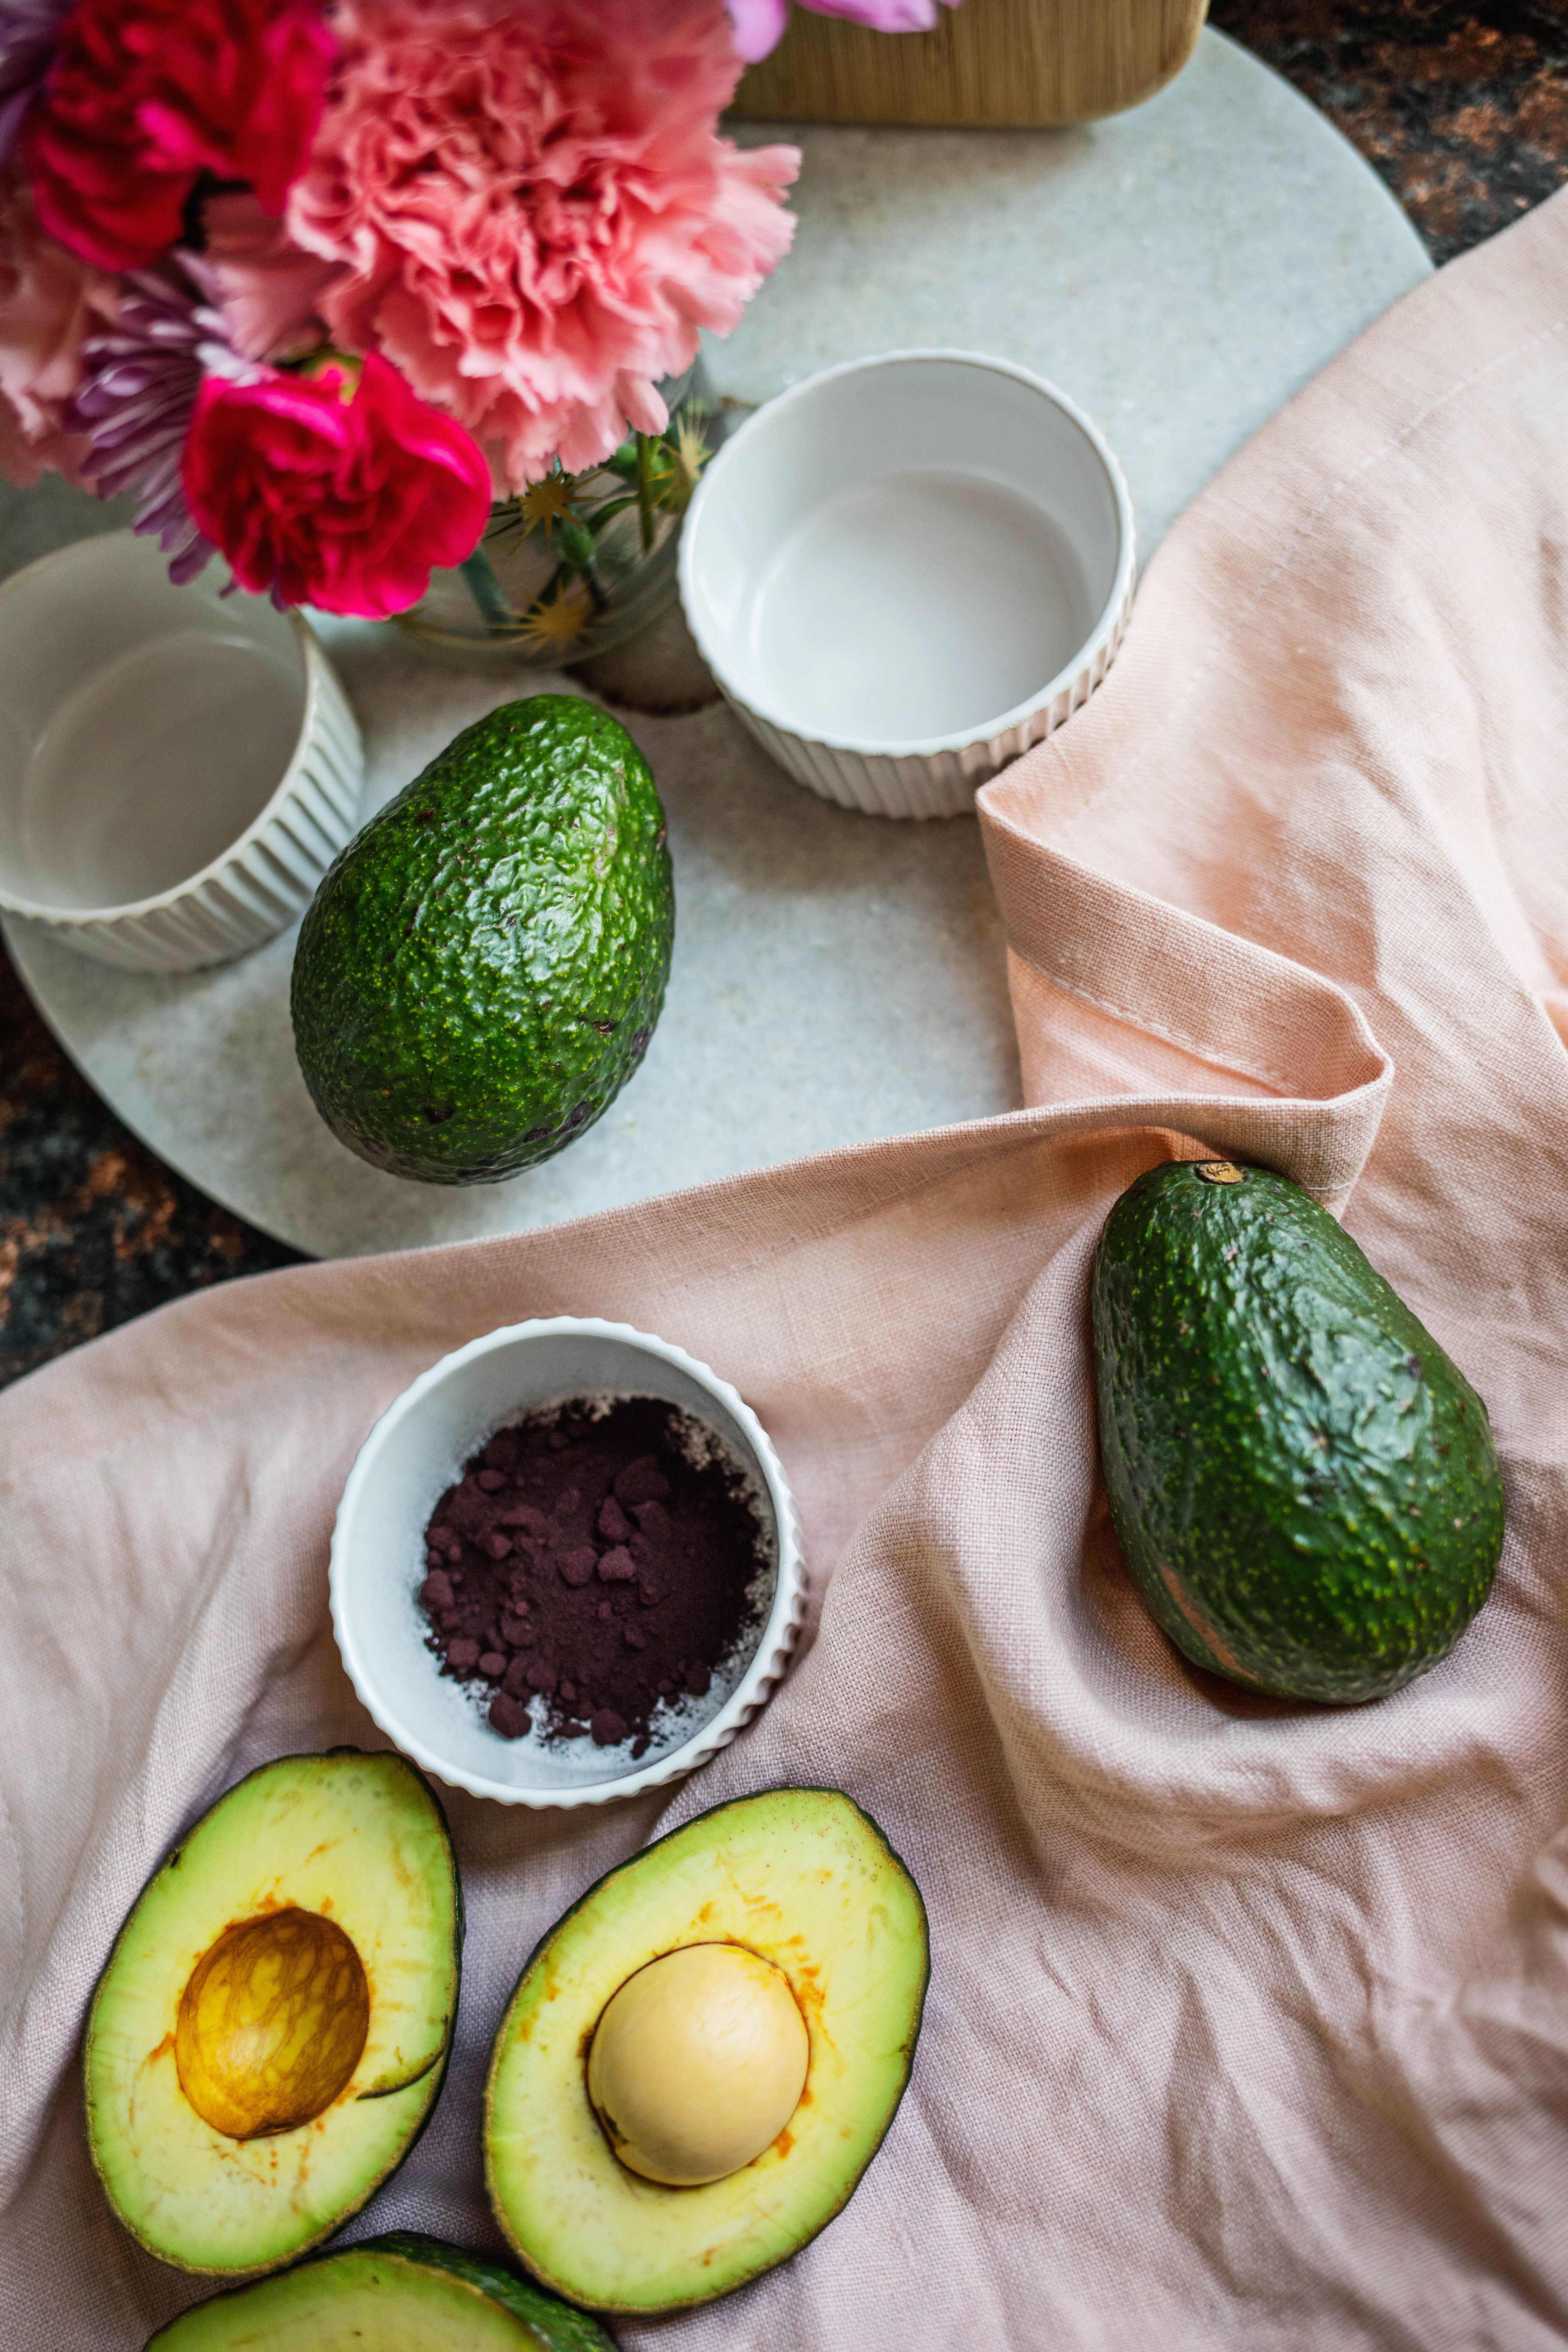 pink fabric with a whole avocado, a cut in half avocado, and a bowl of purple powder on it